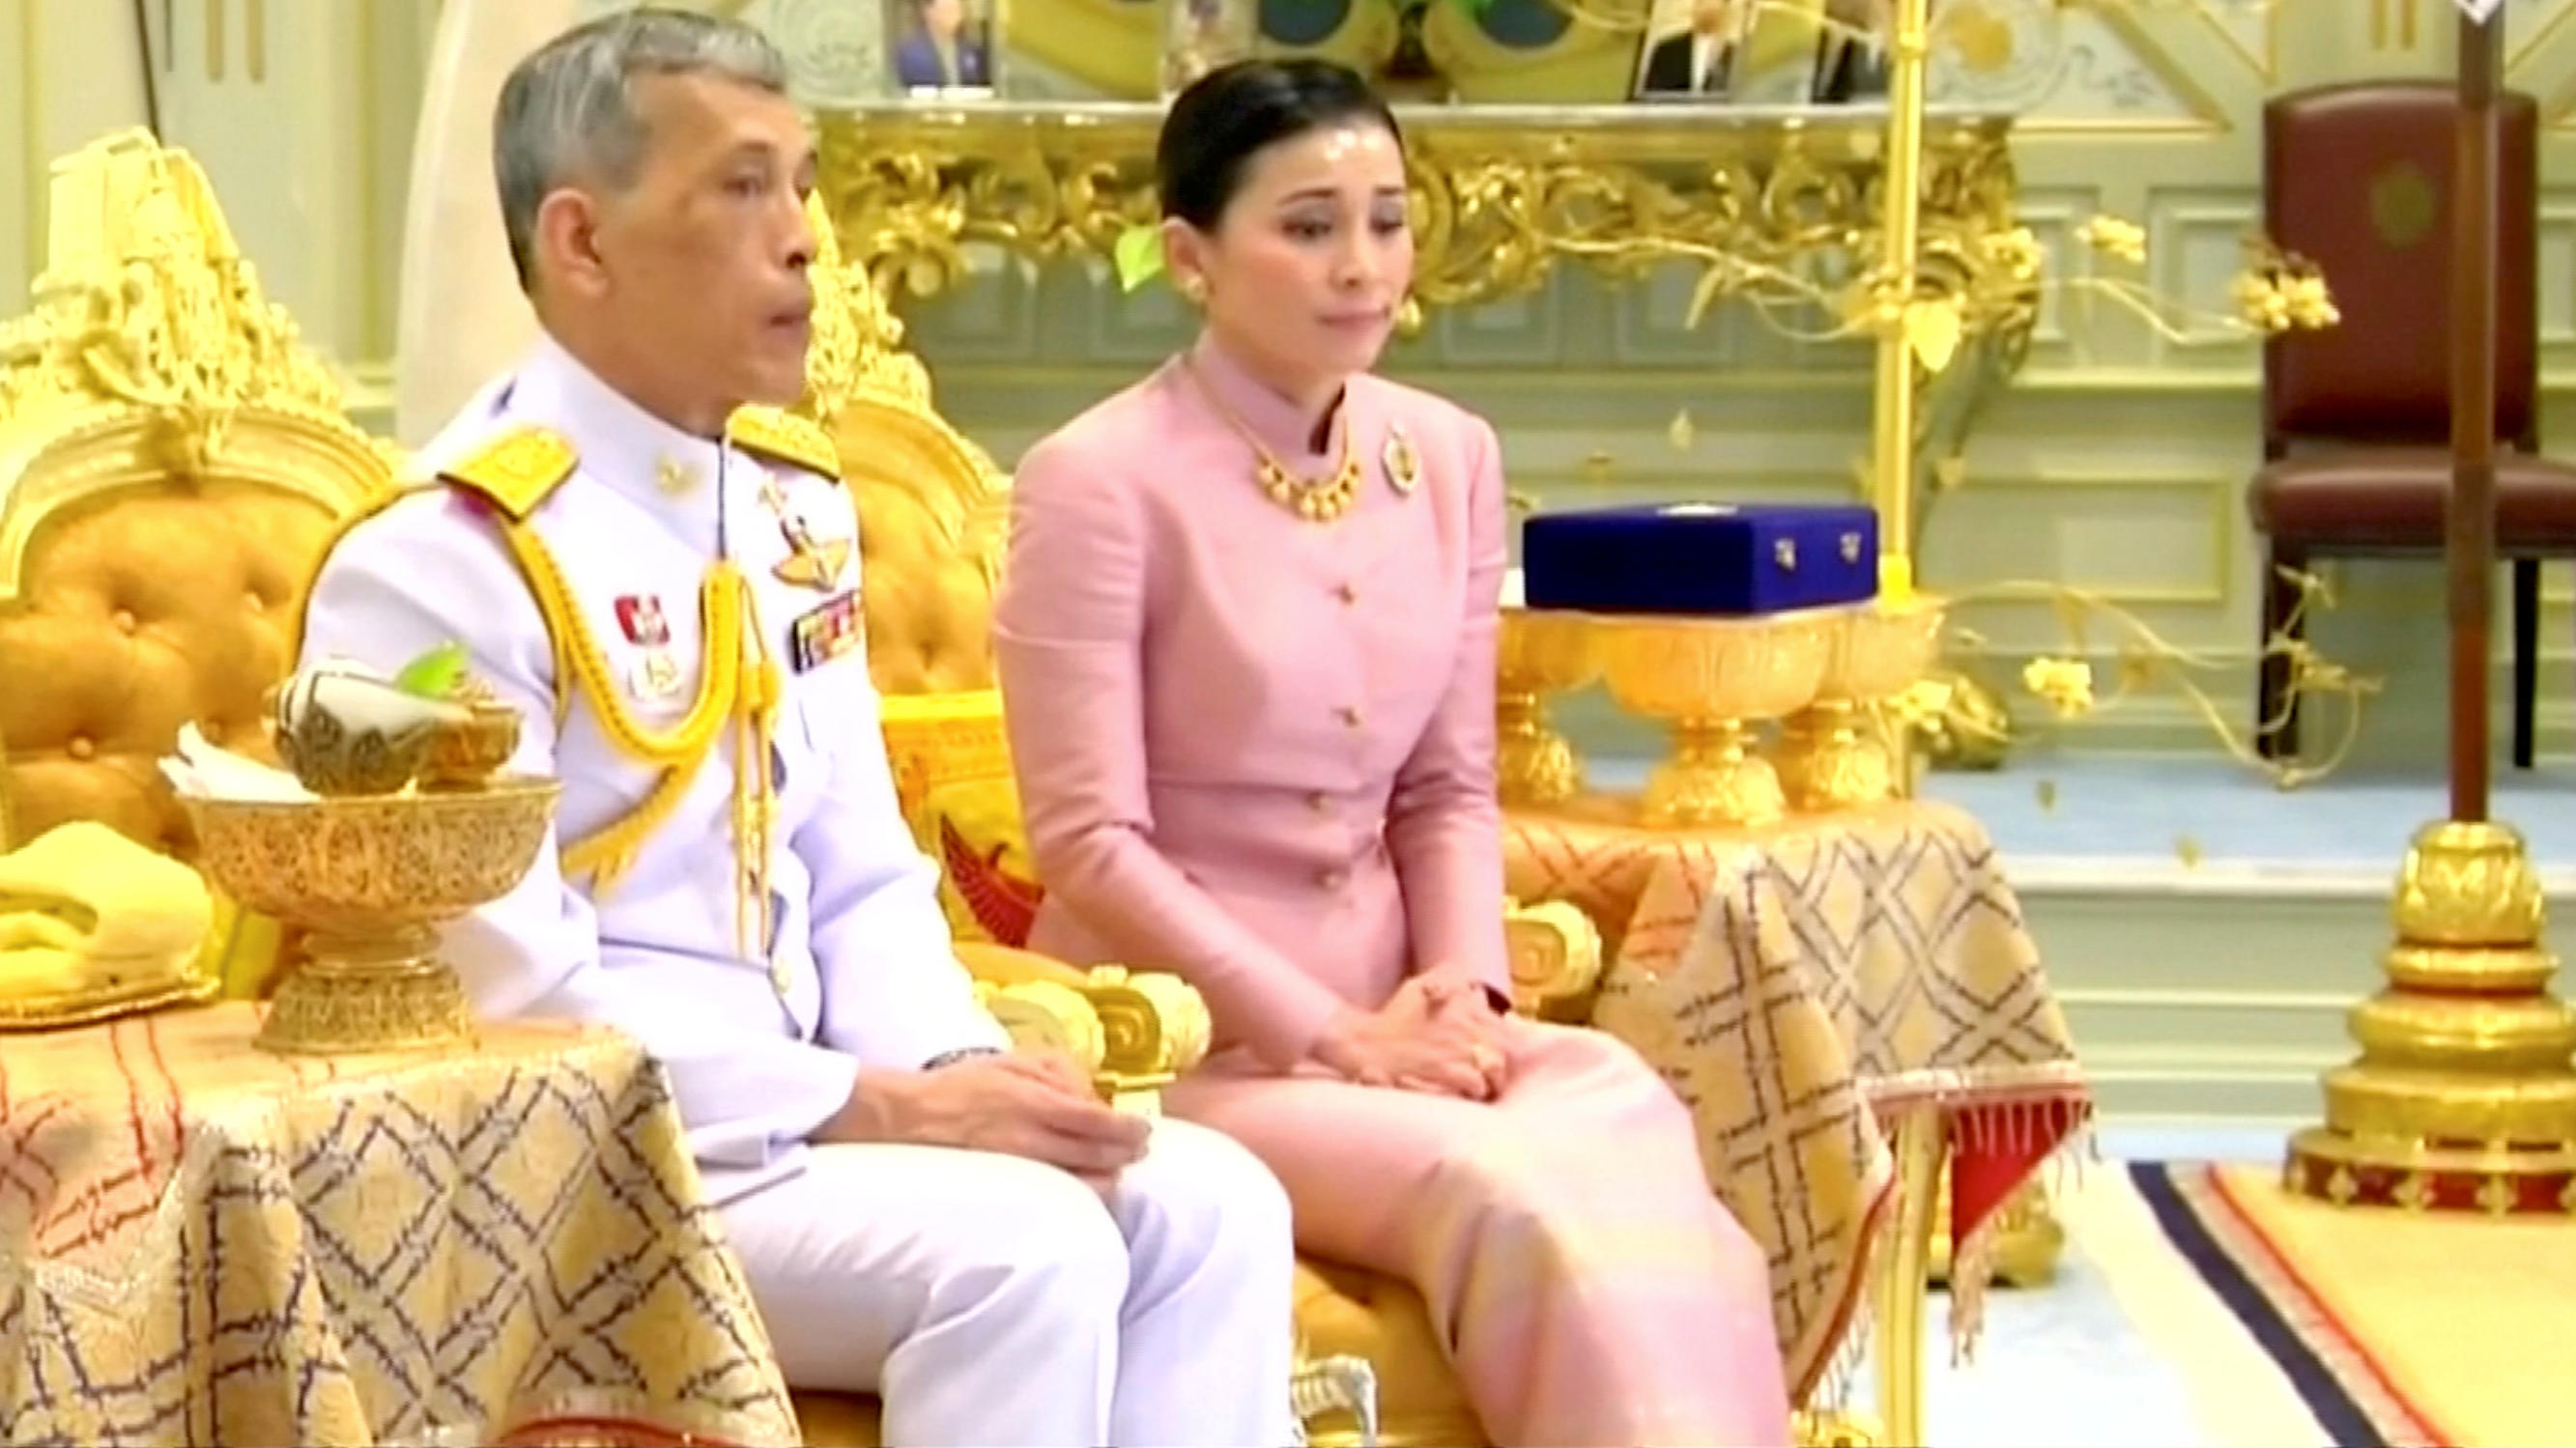 King Maha Vajiralongkorn and his consort, General Suthida Vajiralongkorn named Queen Suthida attend their wedding ceremony in Bangkok, Thailand May 1, 2019, in this screen grab taken from a video. Thai TV Pool  THAILAND OUT. NO COMMERCIAL OR EDITORIA